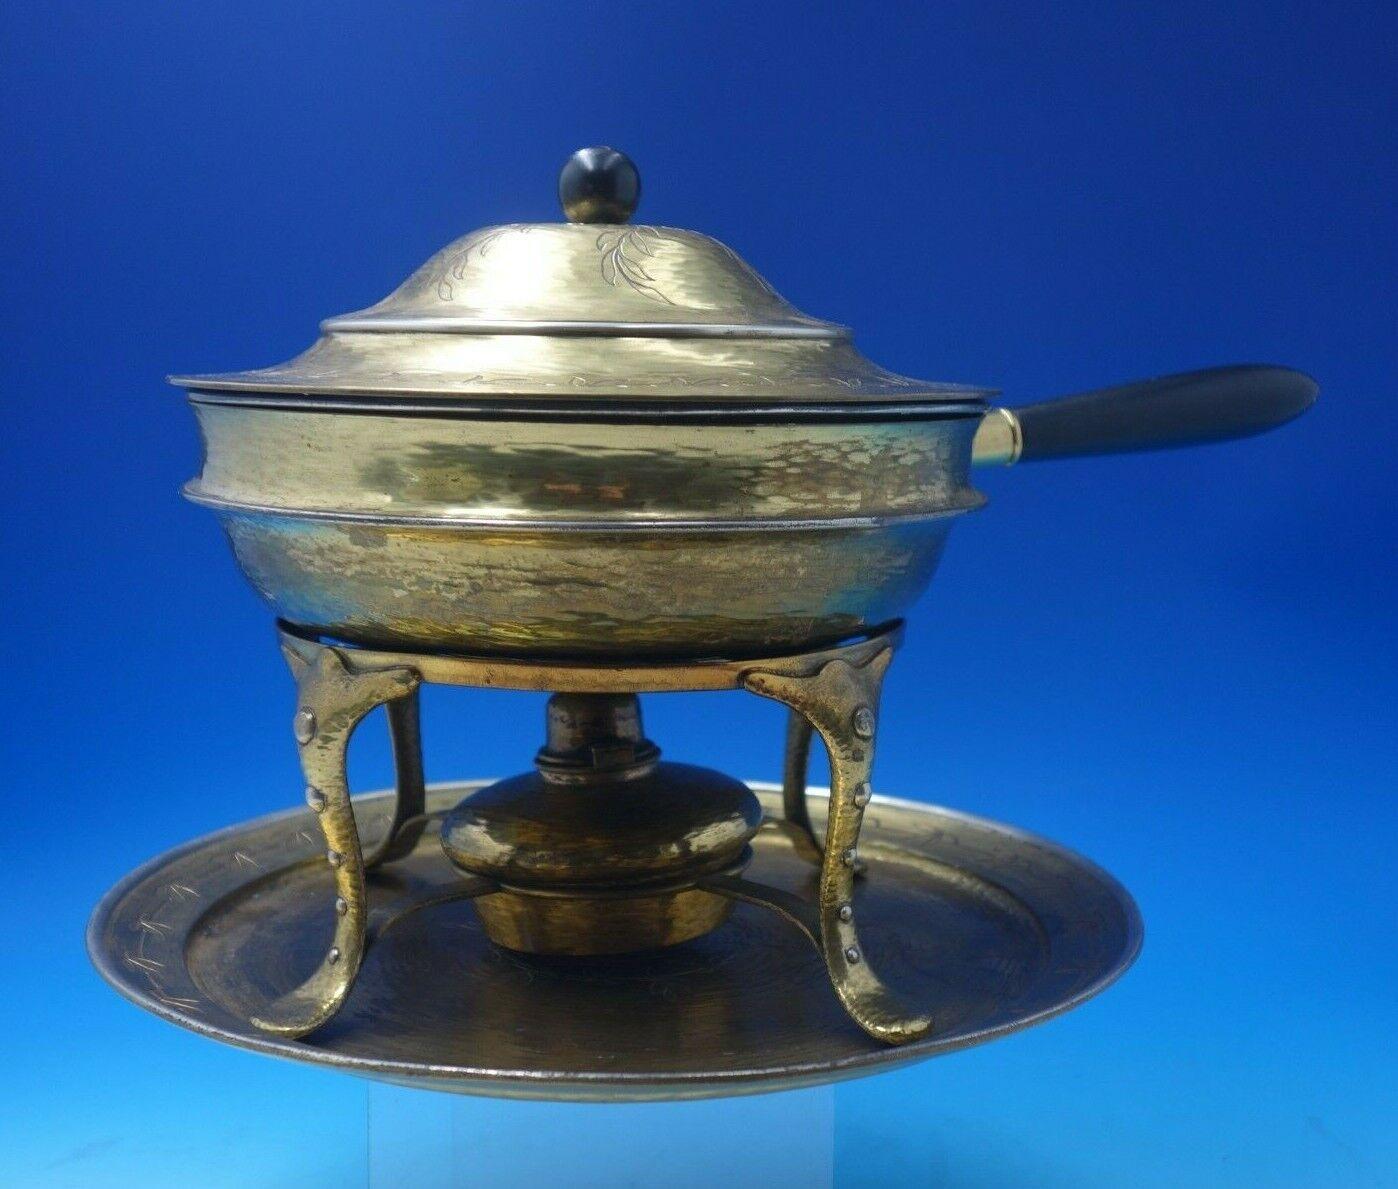 Mixed Metals by Tiffany and Co.

Extraordinary Mixed Metals by Tiffany and Co sterling silver (and other metals) chafing dish with underplate with 